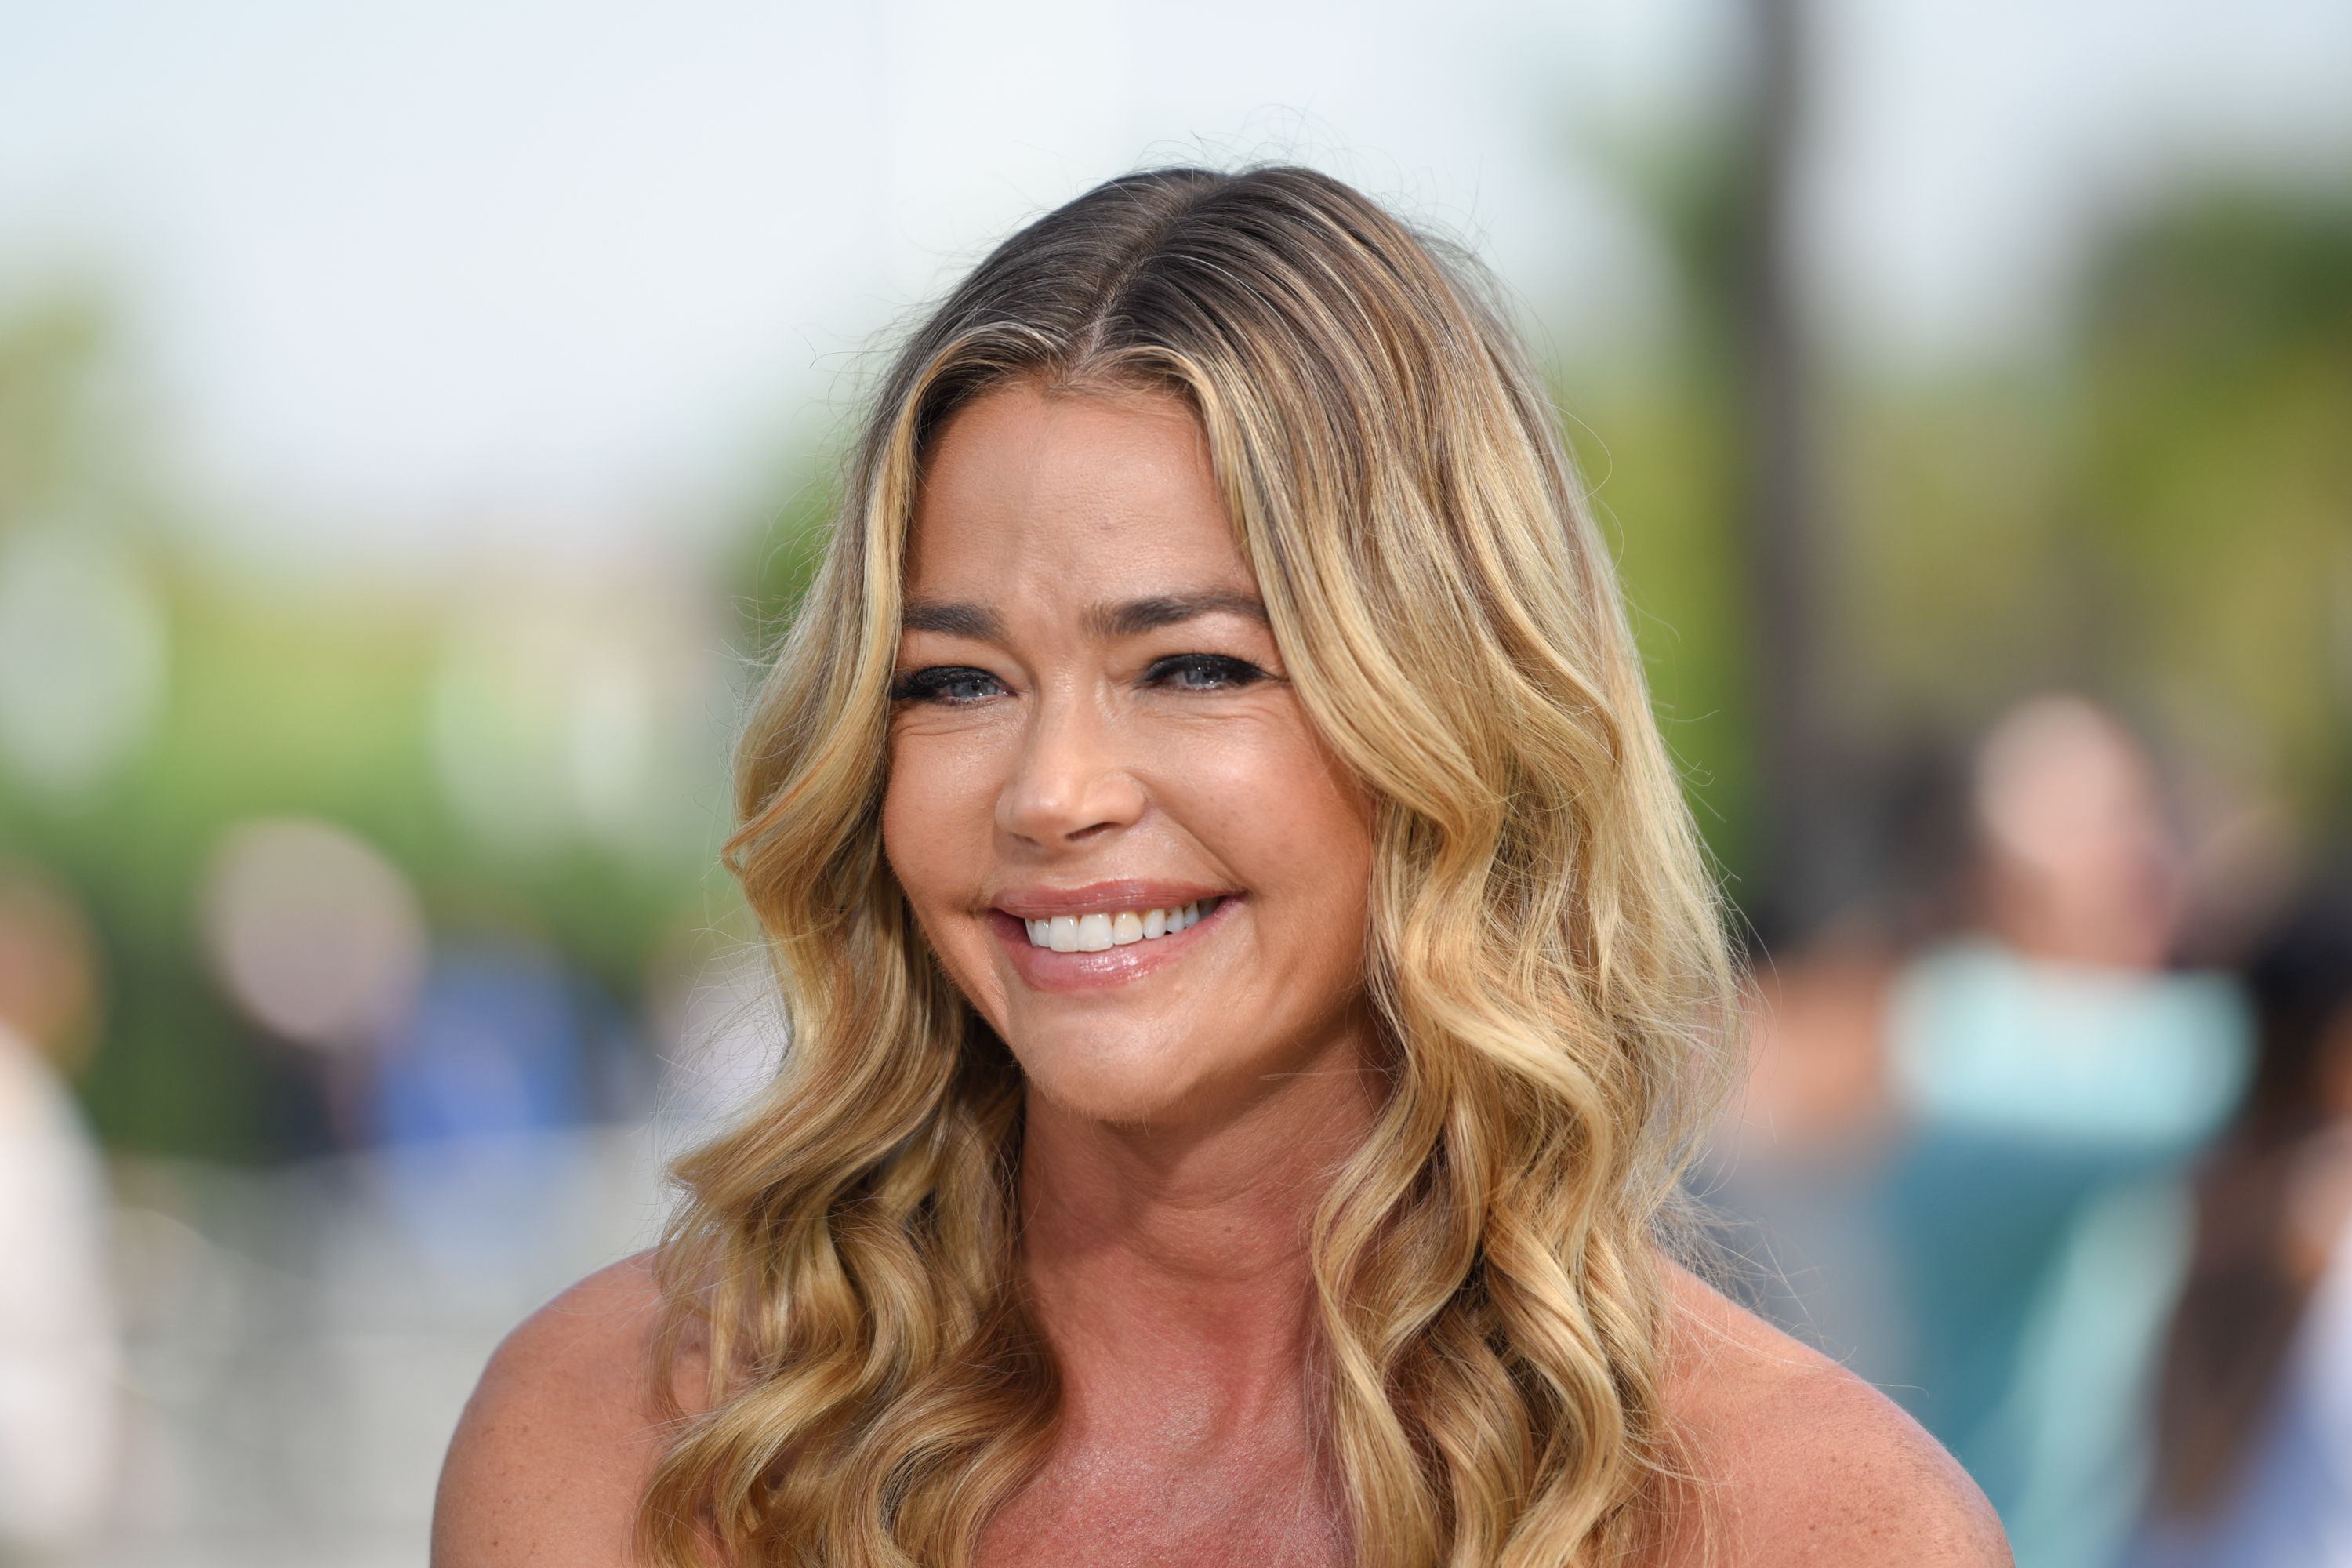 Denise Richards during "Extra" at Universal Studios Hollywood on August 13, 2018 in Universal City, California. | Source: Getty Images